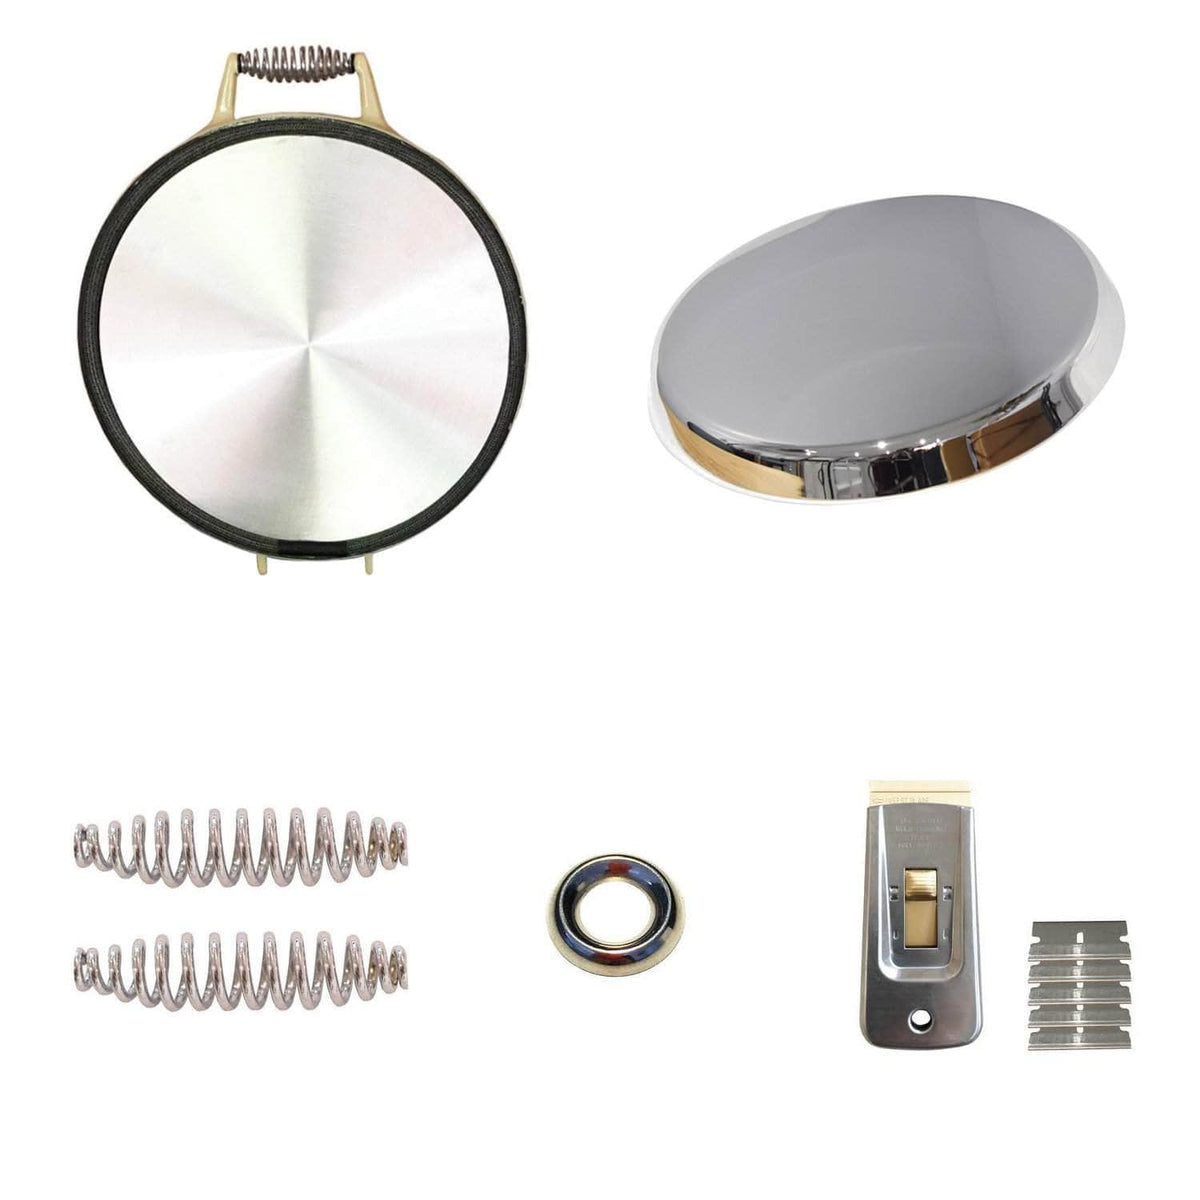 *NEW* Complete stainless steel lid refurb kit for use with Aga range cookers